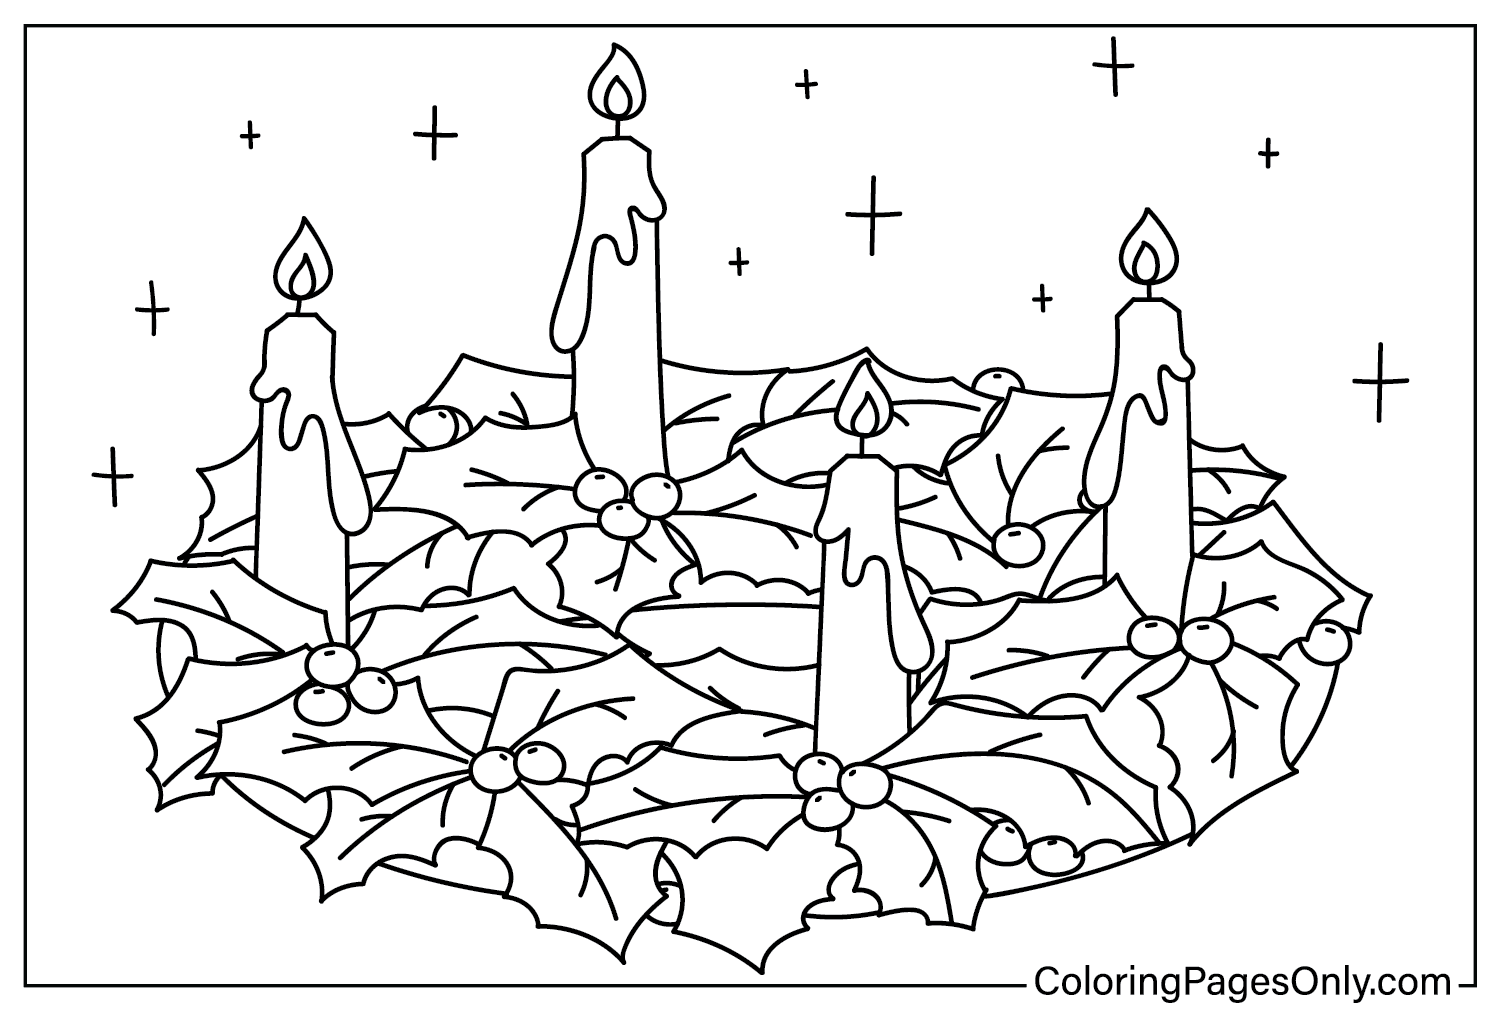 23 Advent Wreath Coloring Pages - ColoringPagesOnly.com